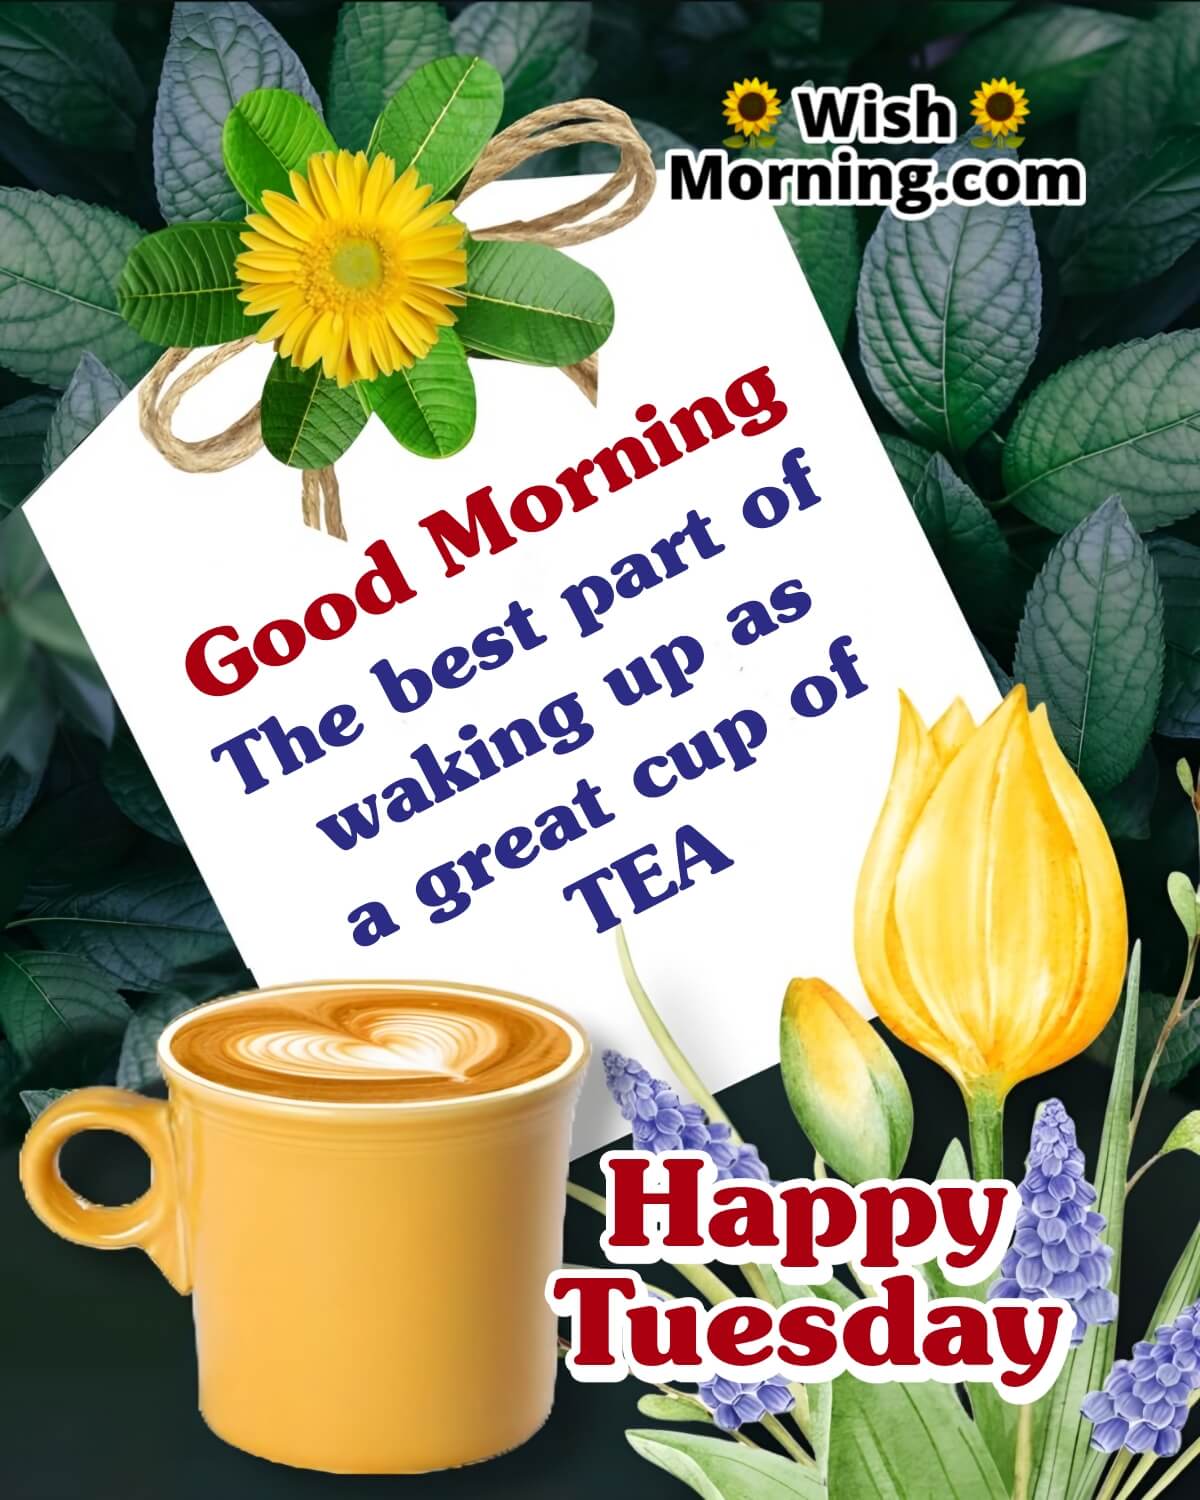 Good Morning Tuesday With Great Cup Of Tea